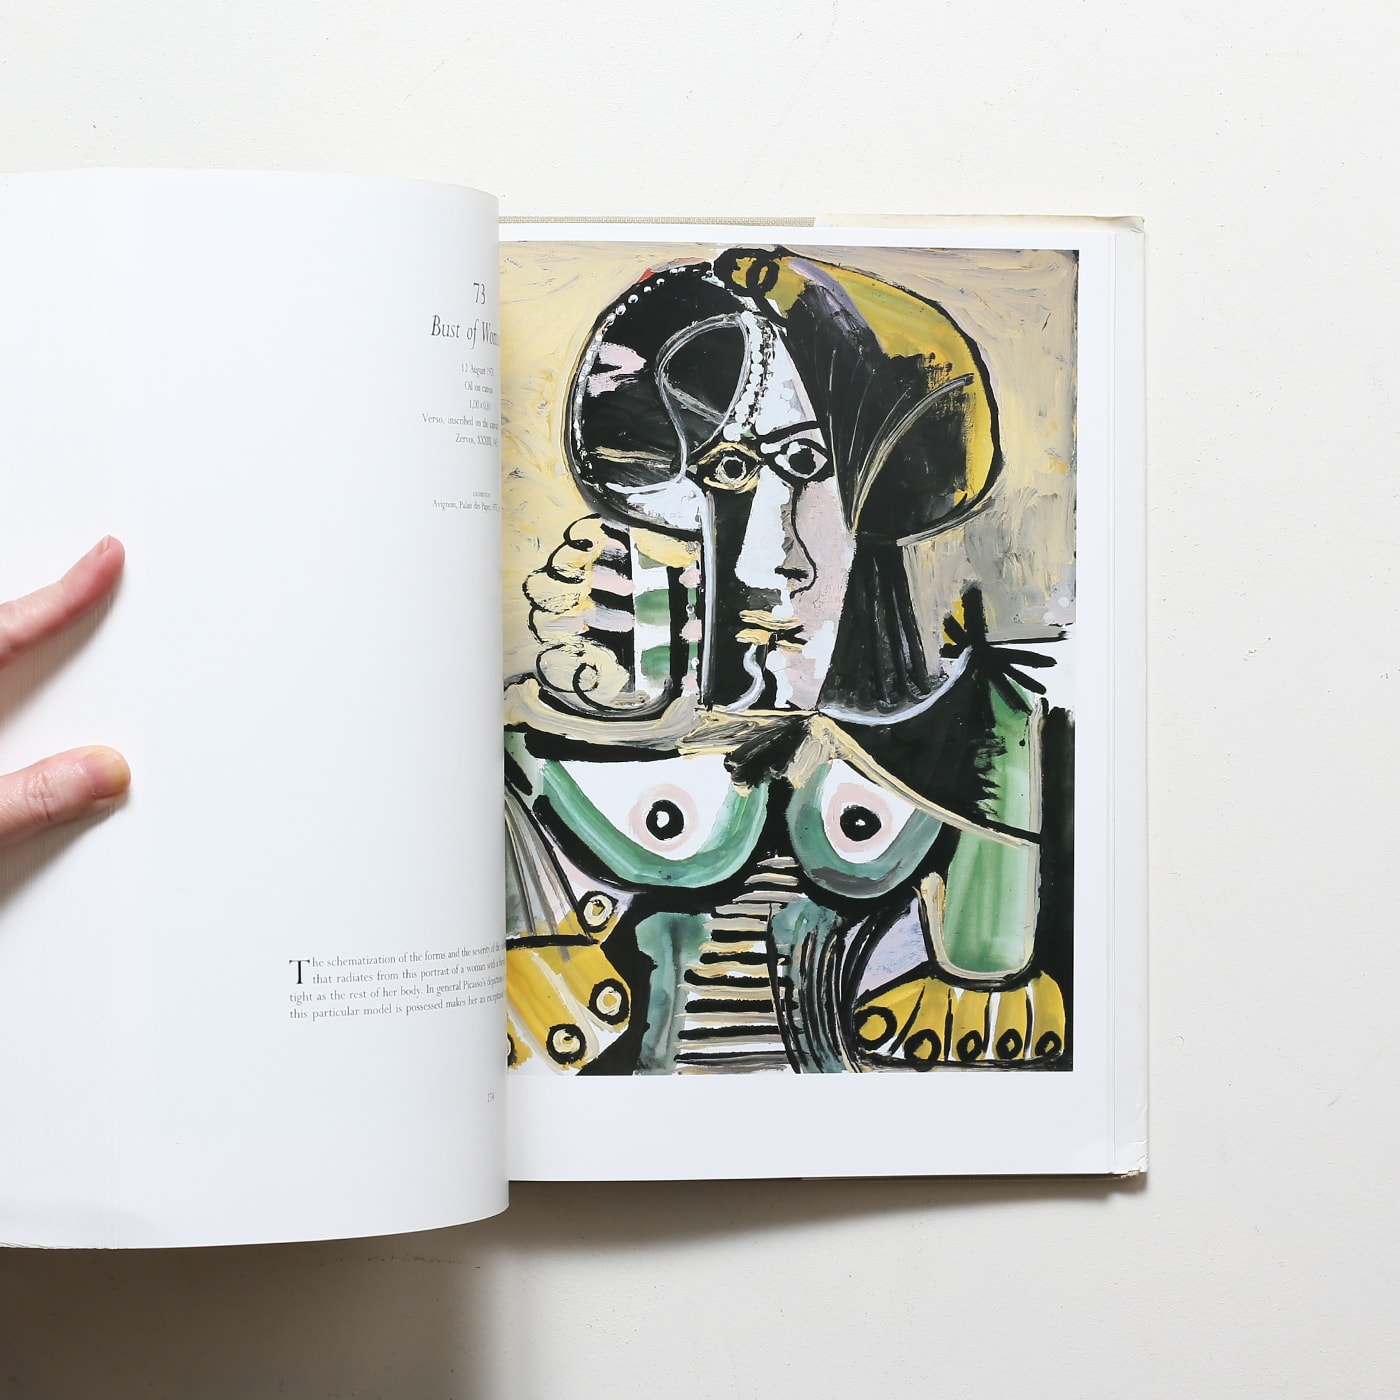 Picasso Meeting in Montreal